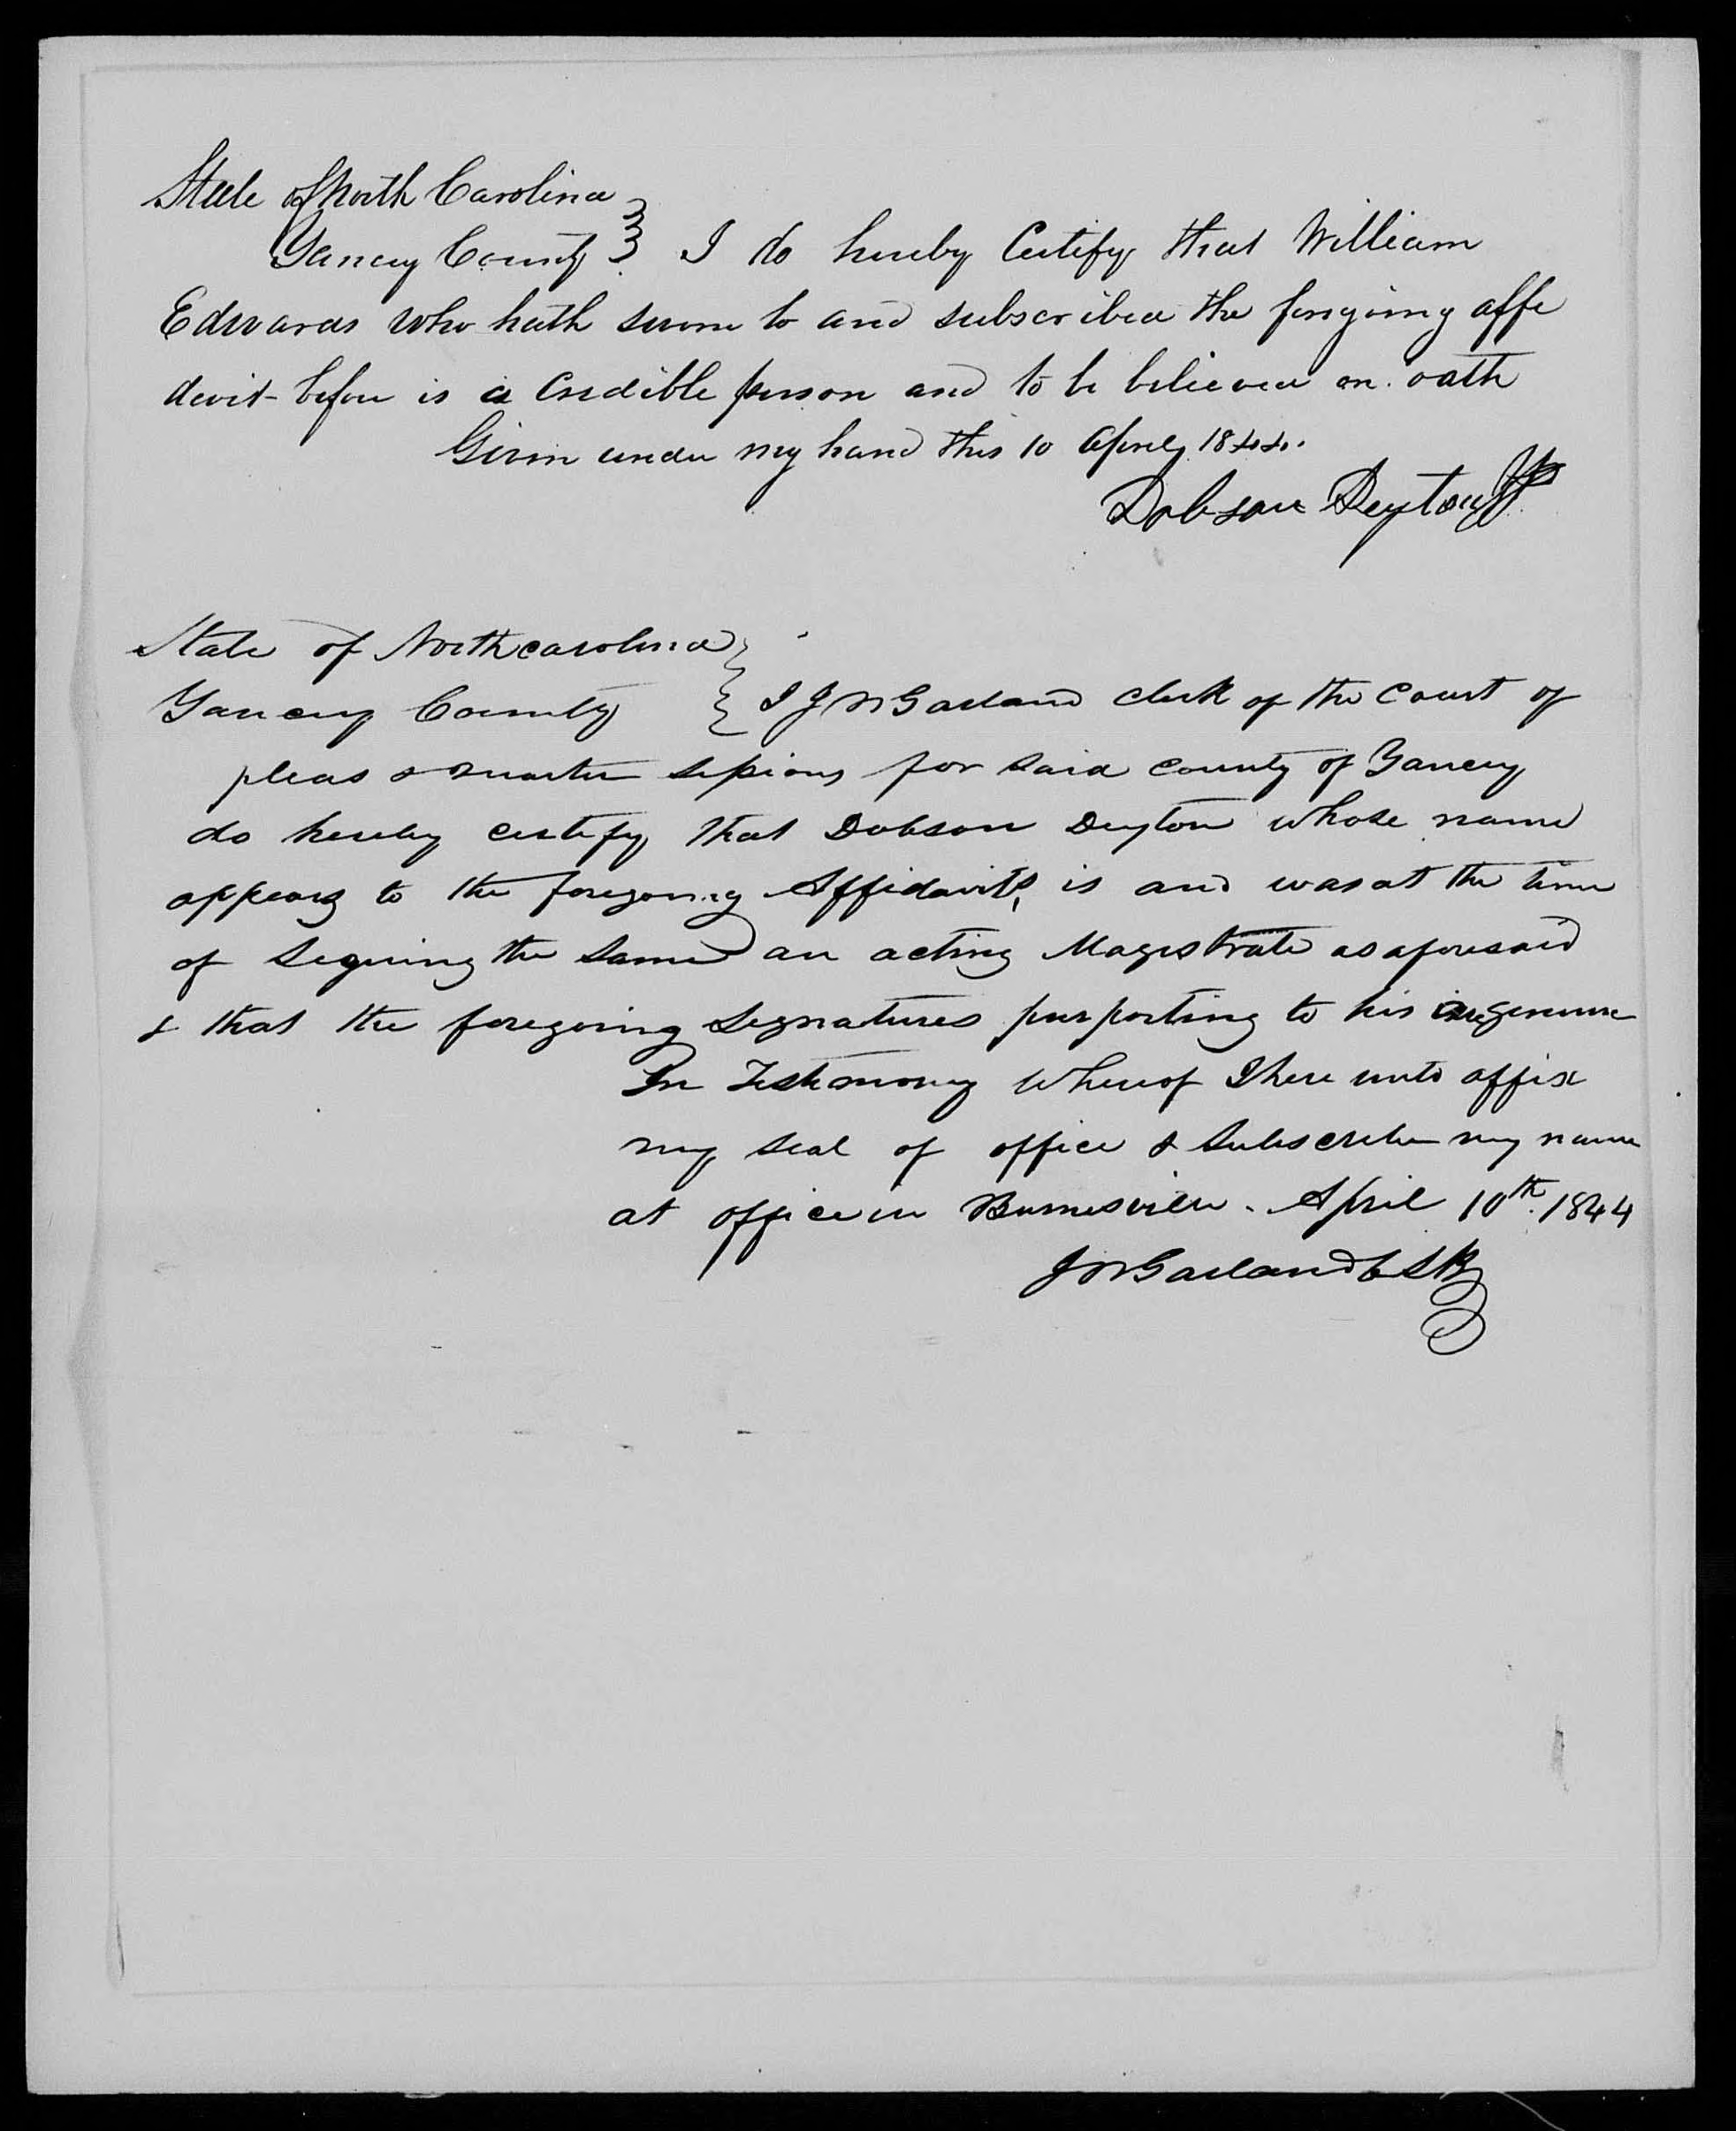 Affidavit of William Edwards Jr. in support of a Pension Claim for Ruth Edwards, 10 April 1844, page 2